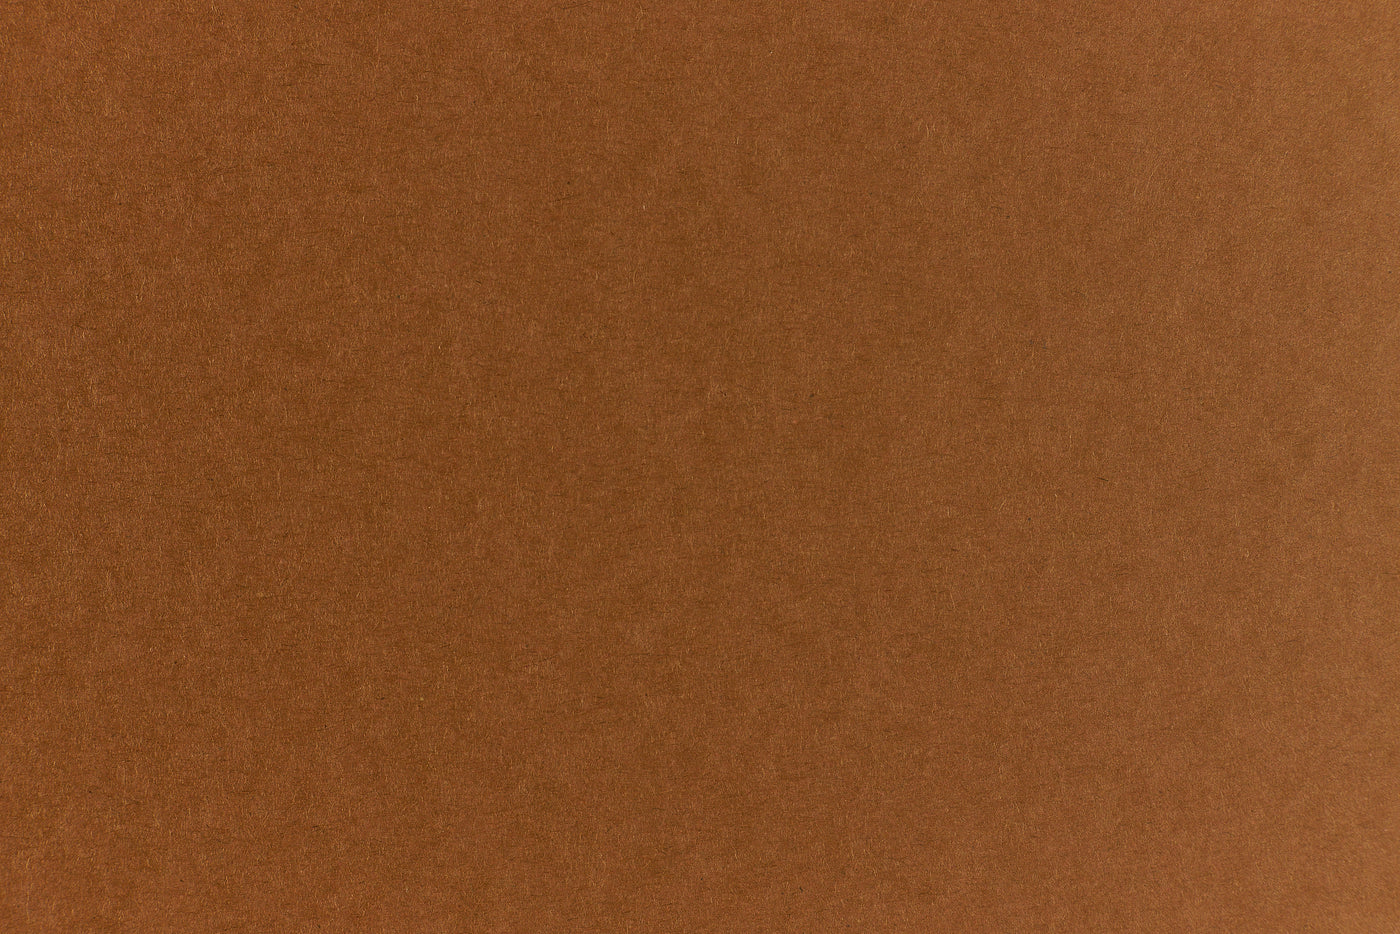 Brown crafting paper with a speckled appearance. 